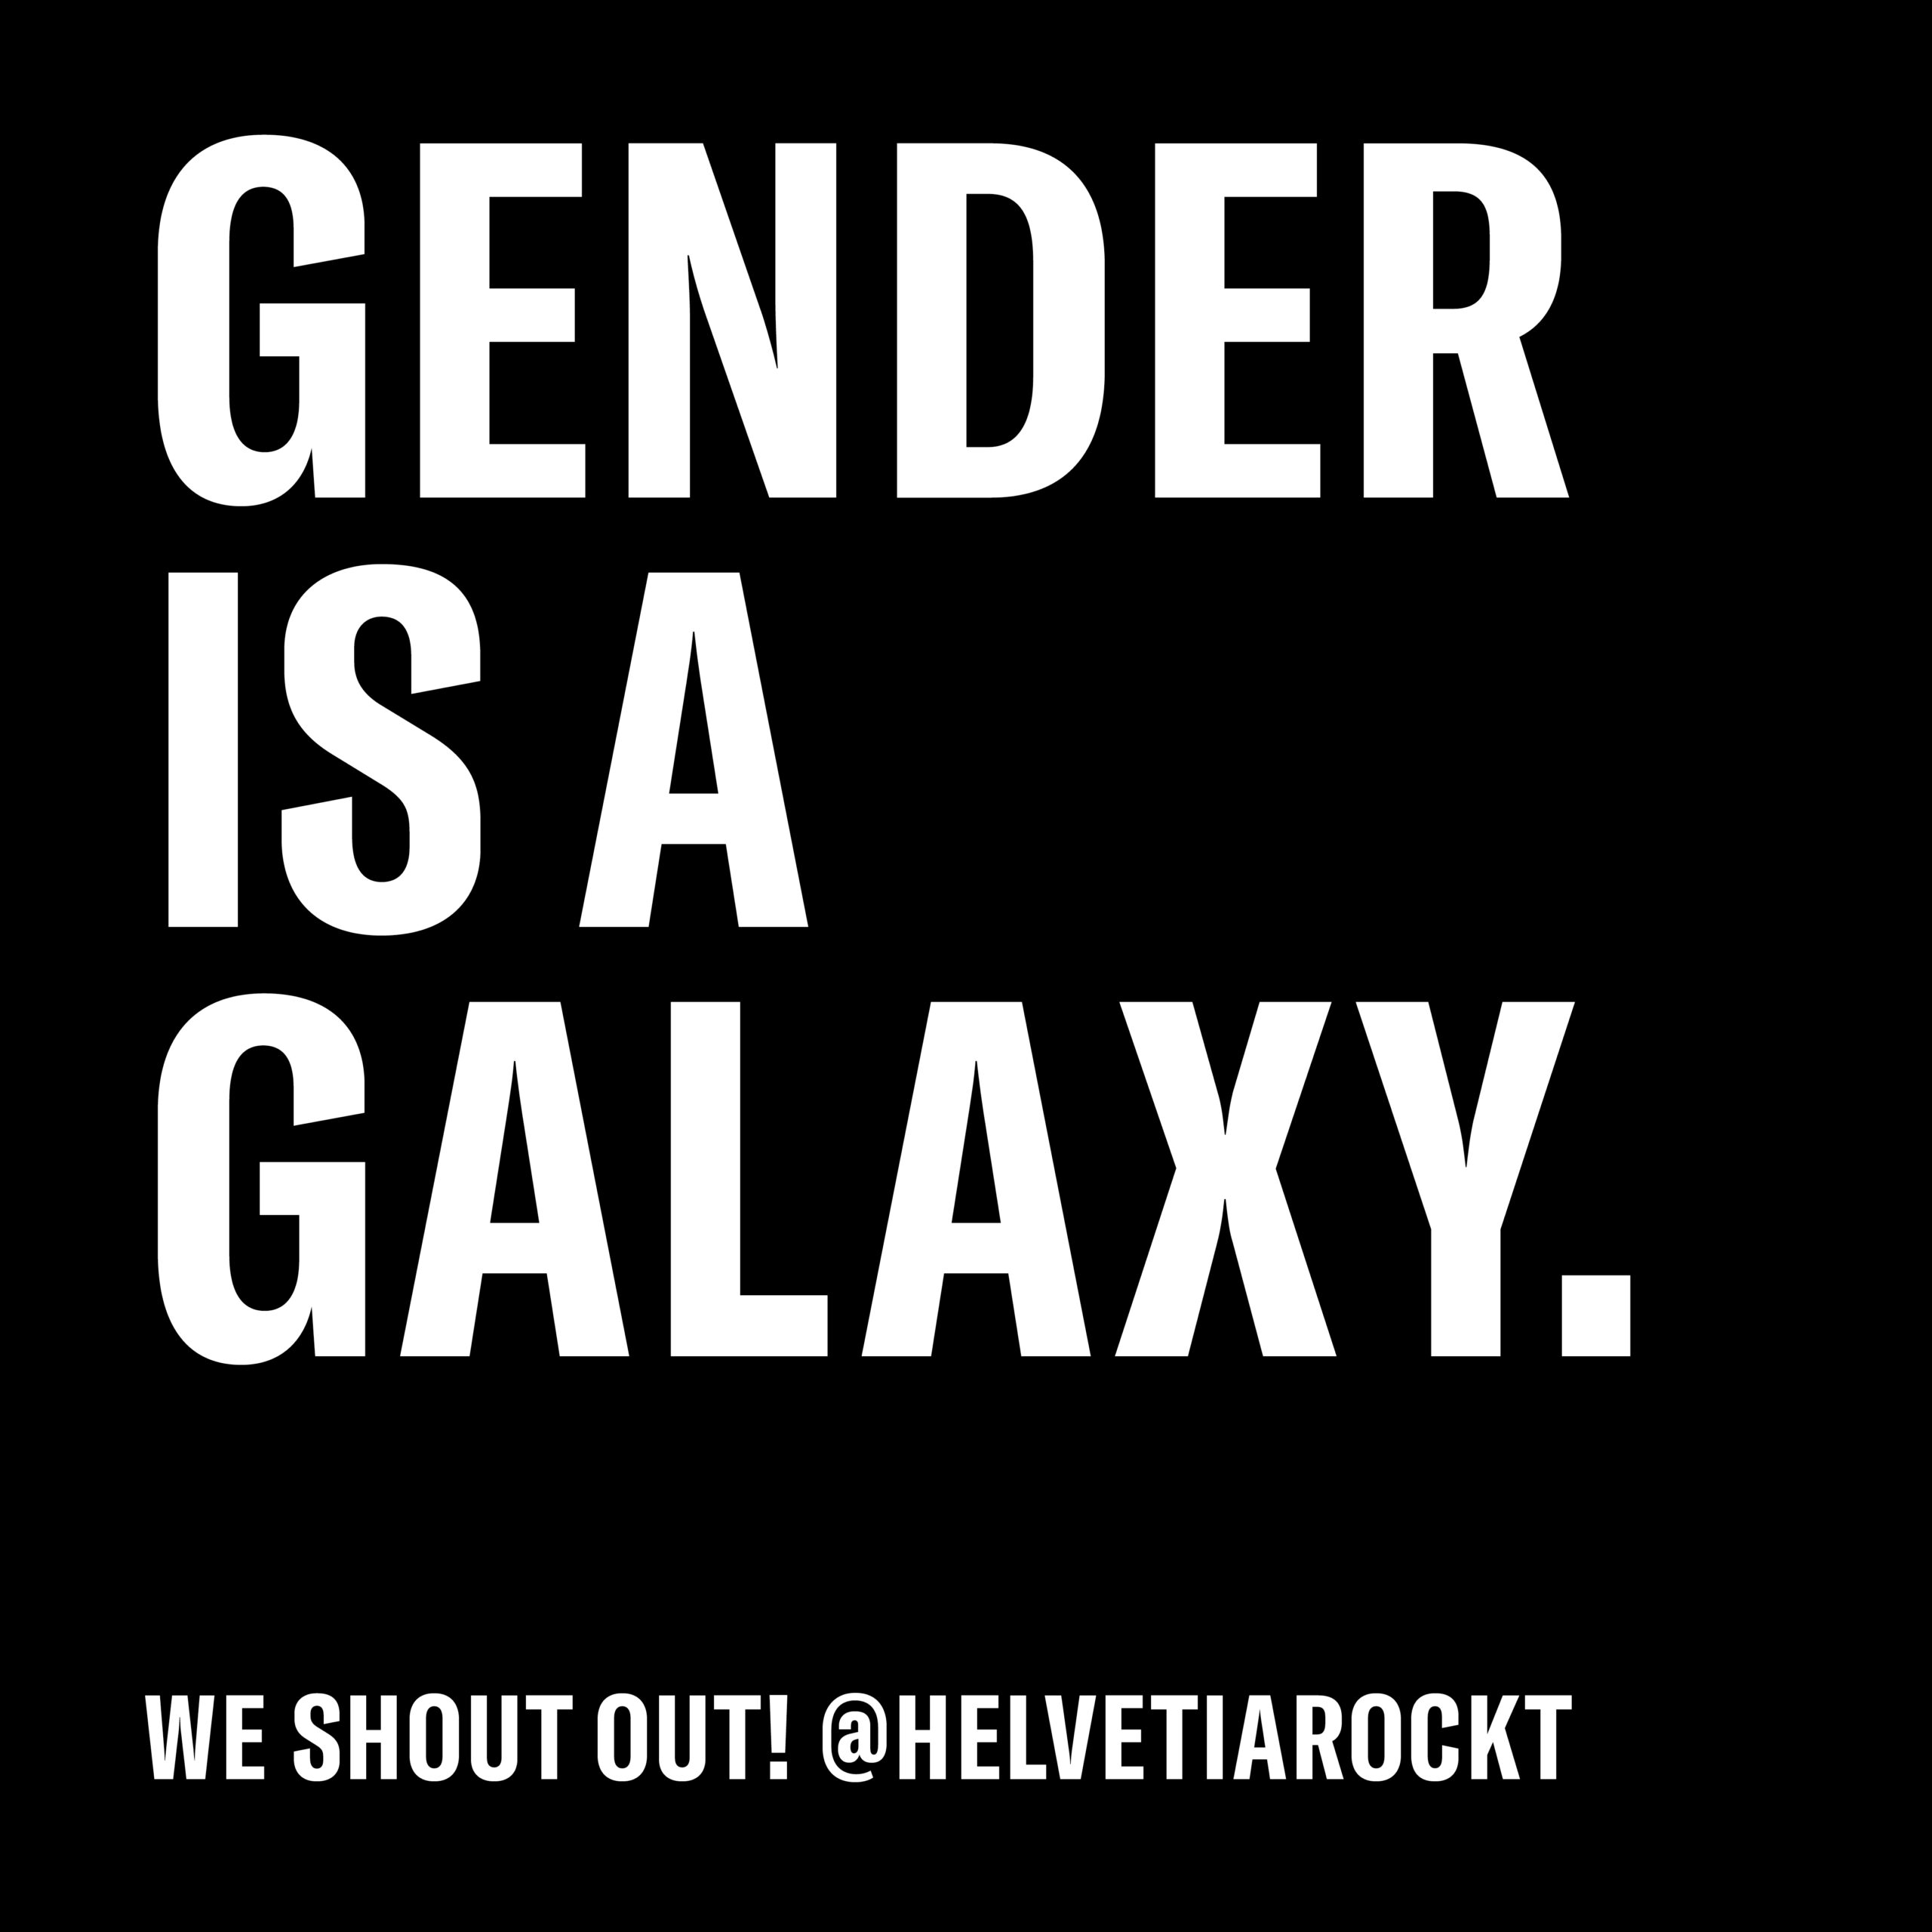 Gender is a galaxy. We shout out @helvetiarockt